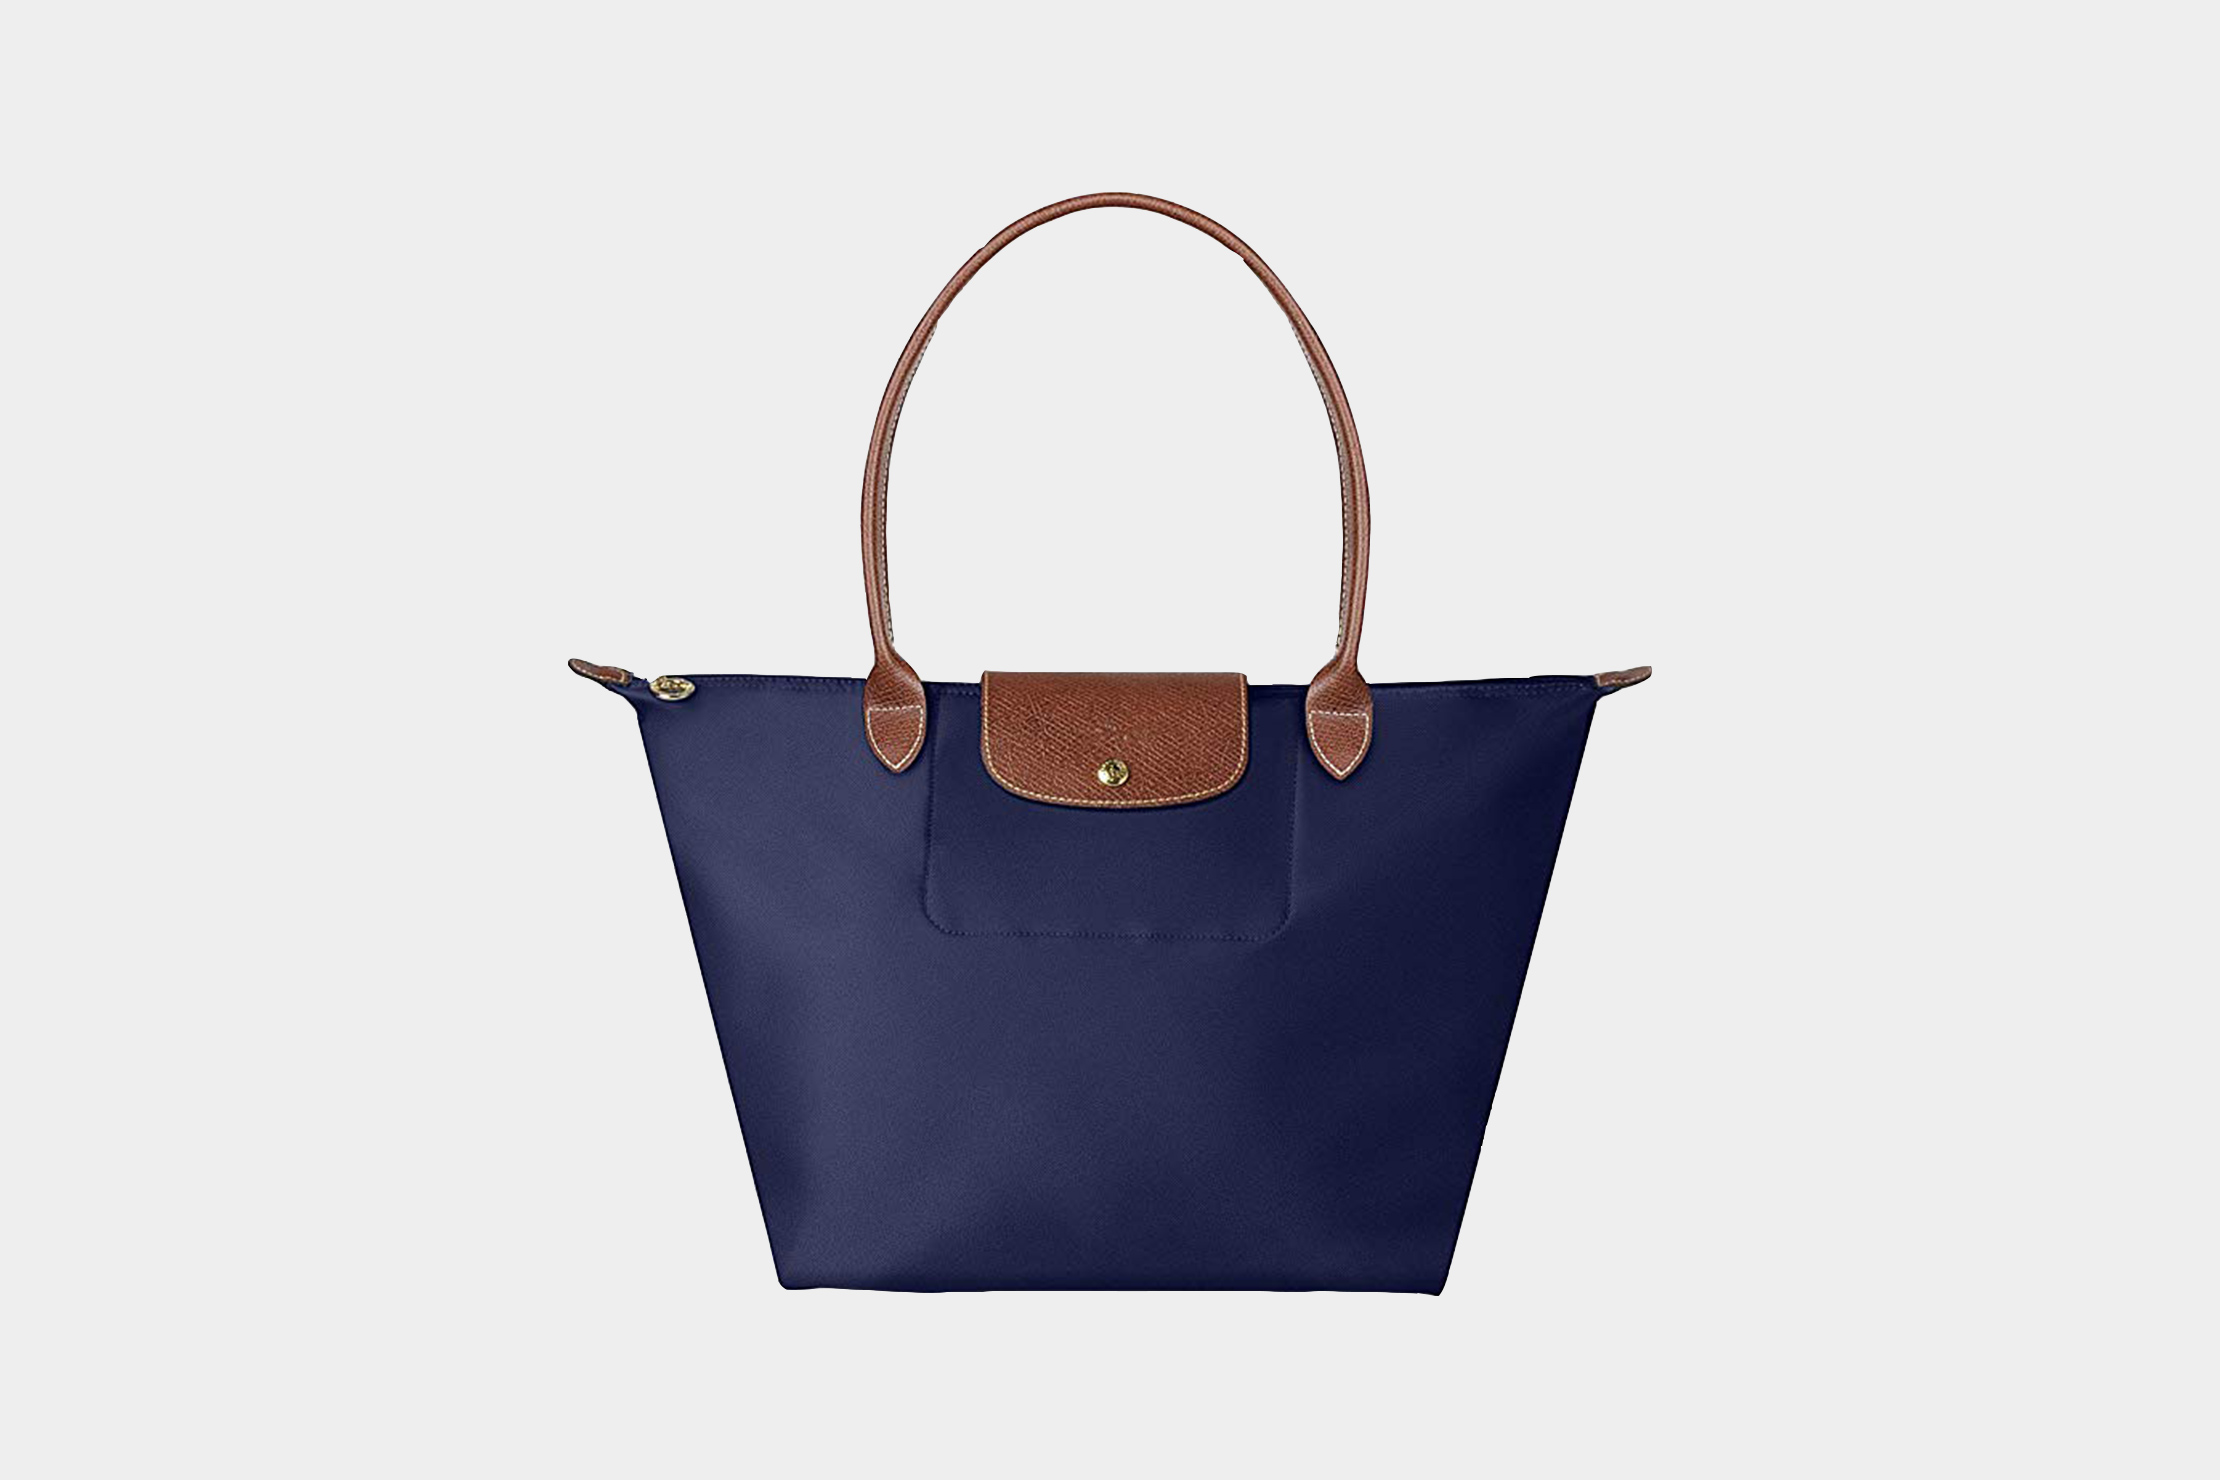 which color longchamp bag is most popular